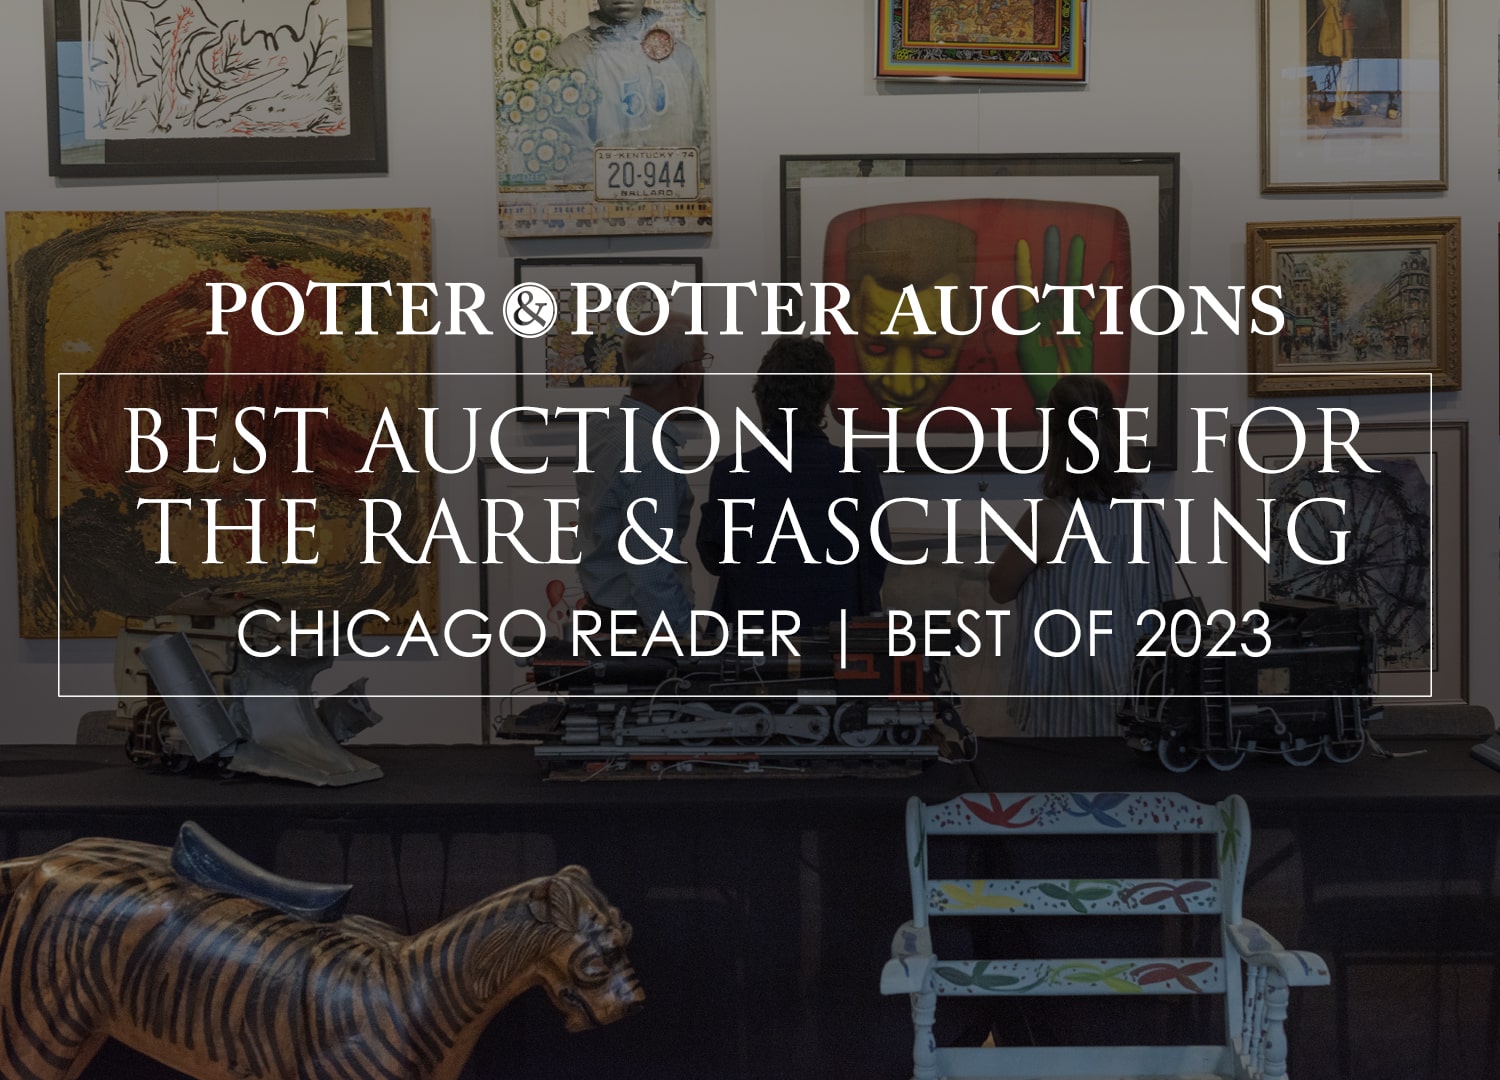 Chicago Reader 2023: Best Auction House for the Fascinating and Rare